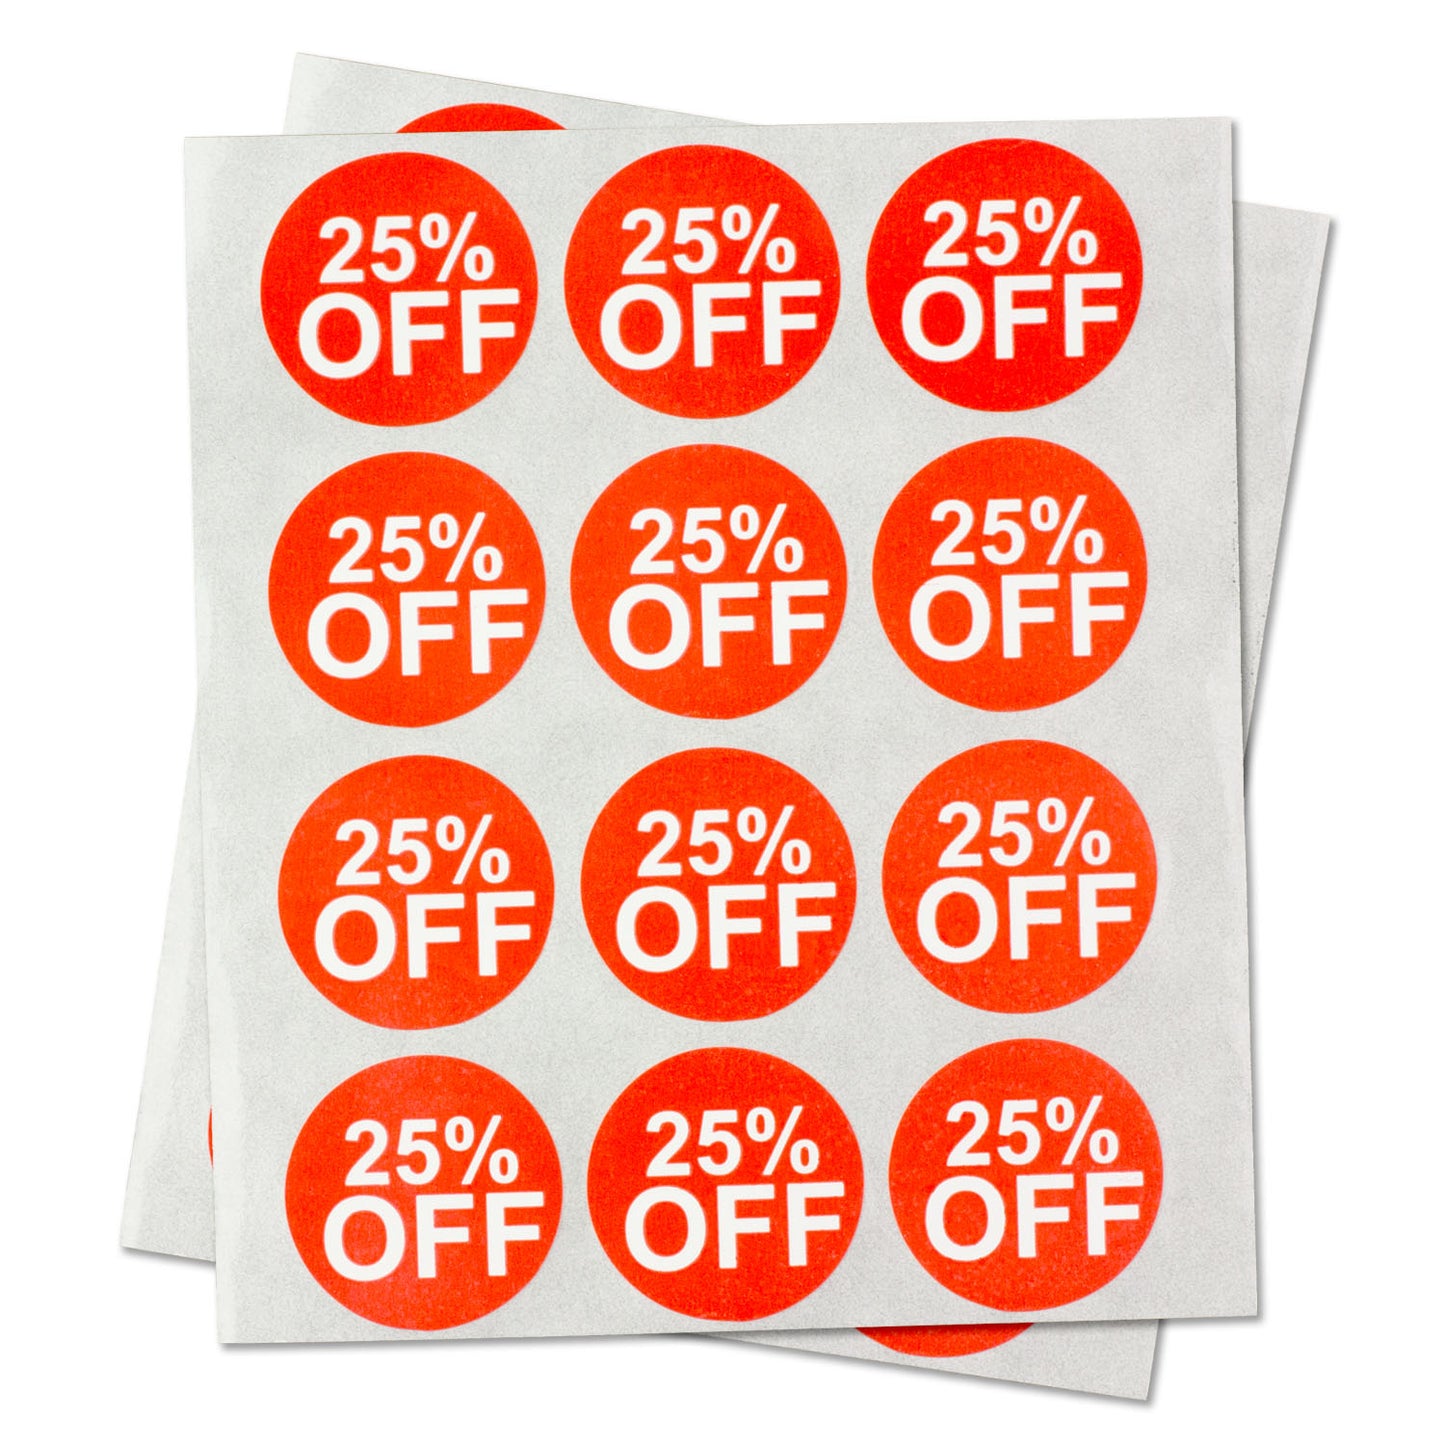 1 inch | Retail & Sales: 25% Percent Off Stickers